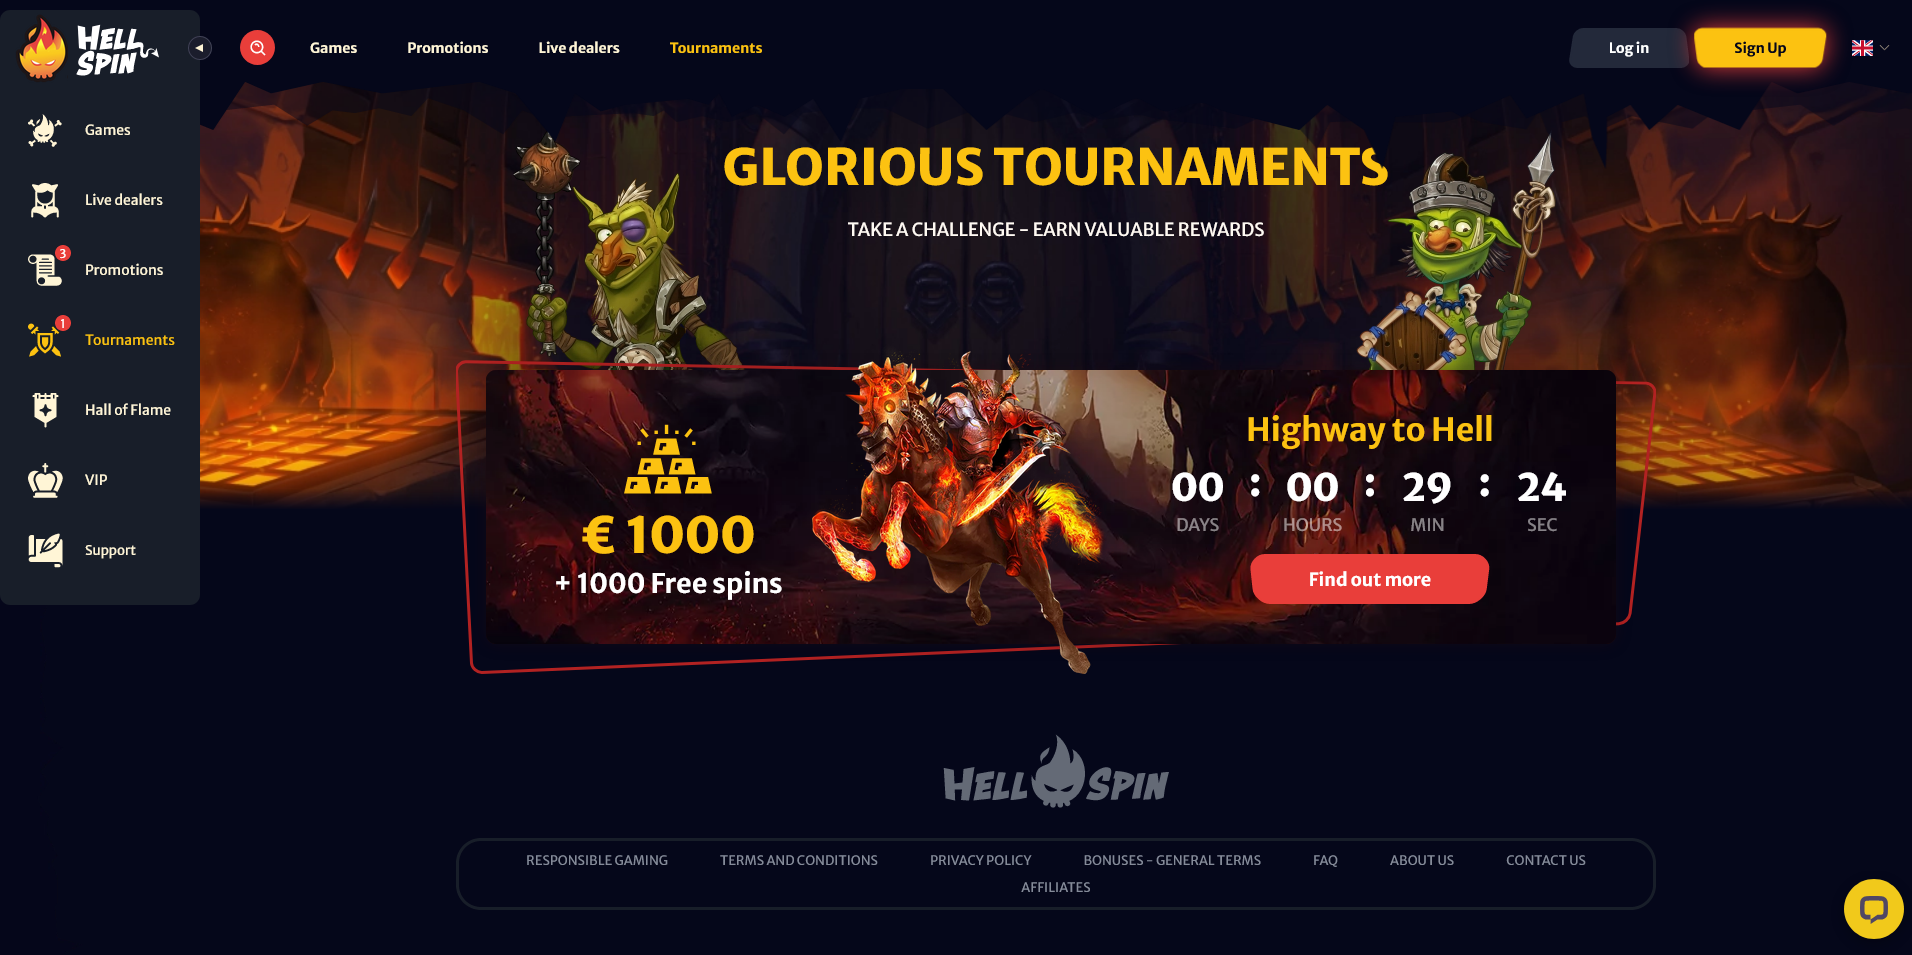 Screenshot of the Hell Spin Casino tournaments page